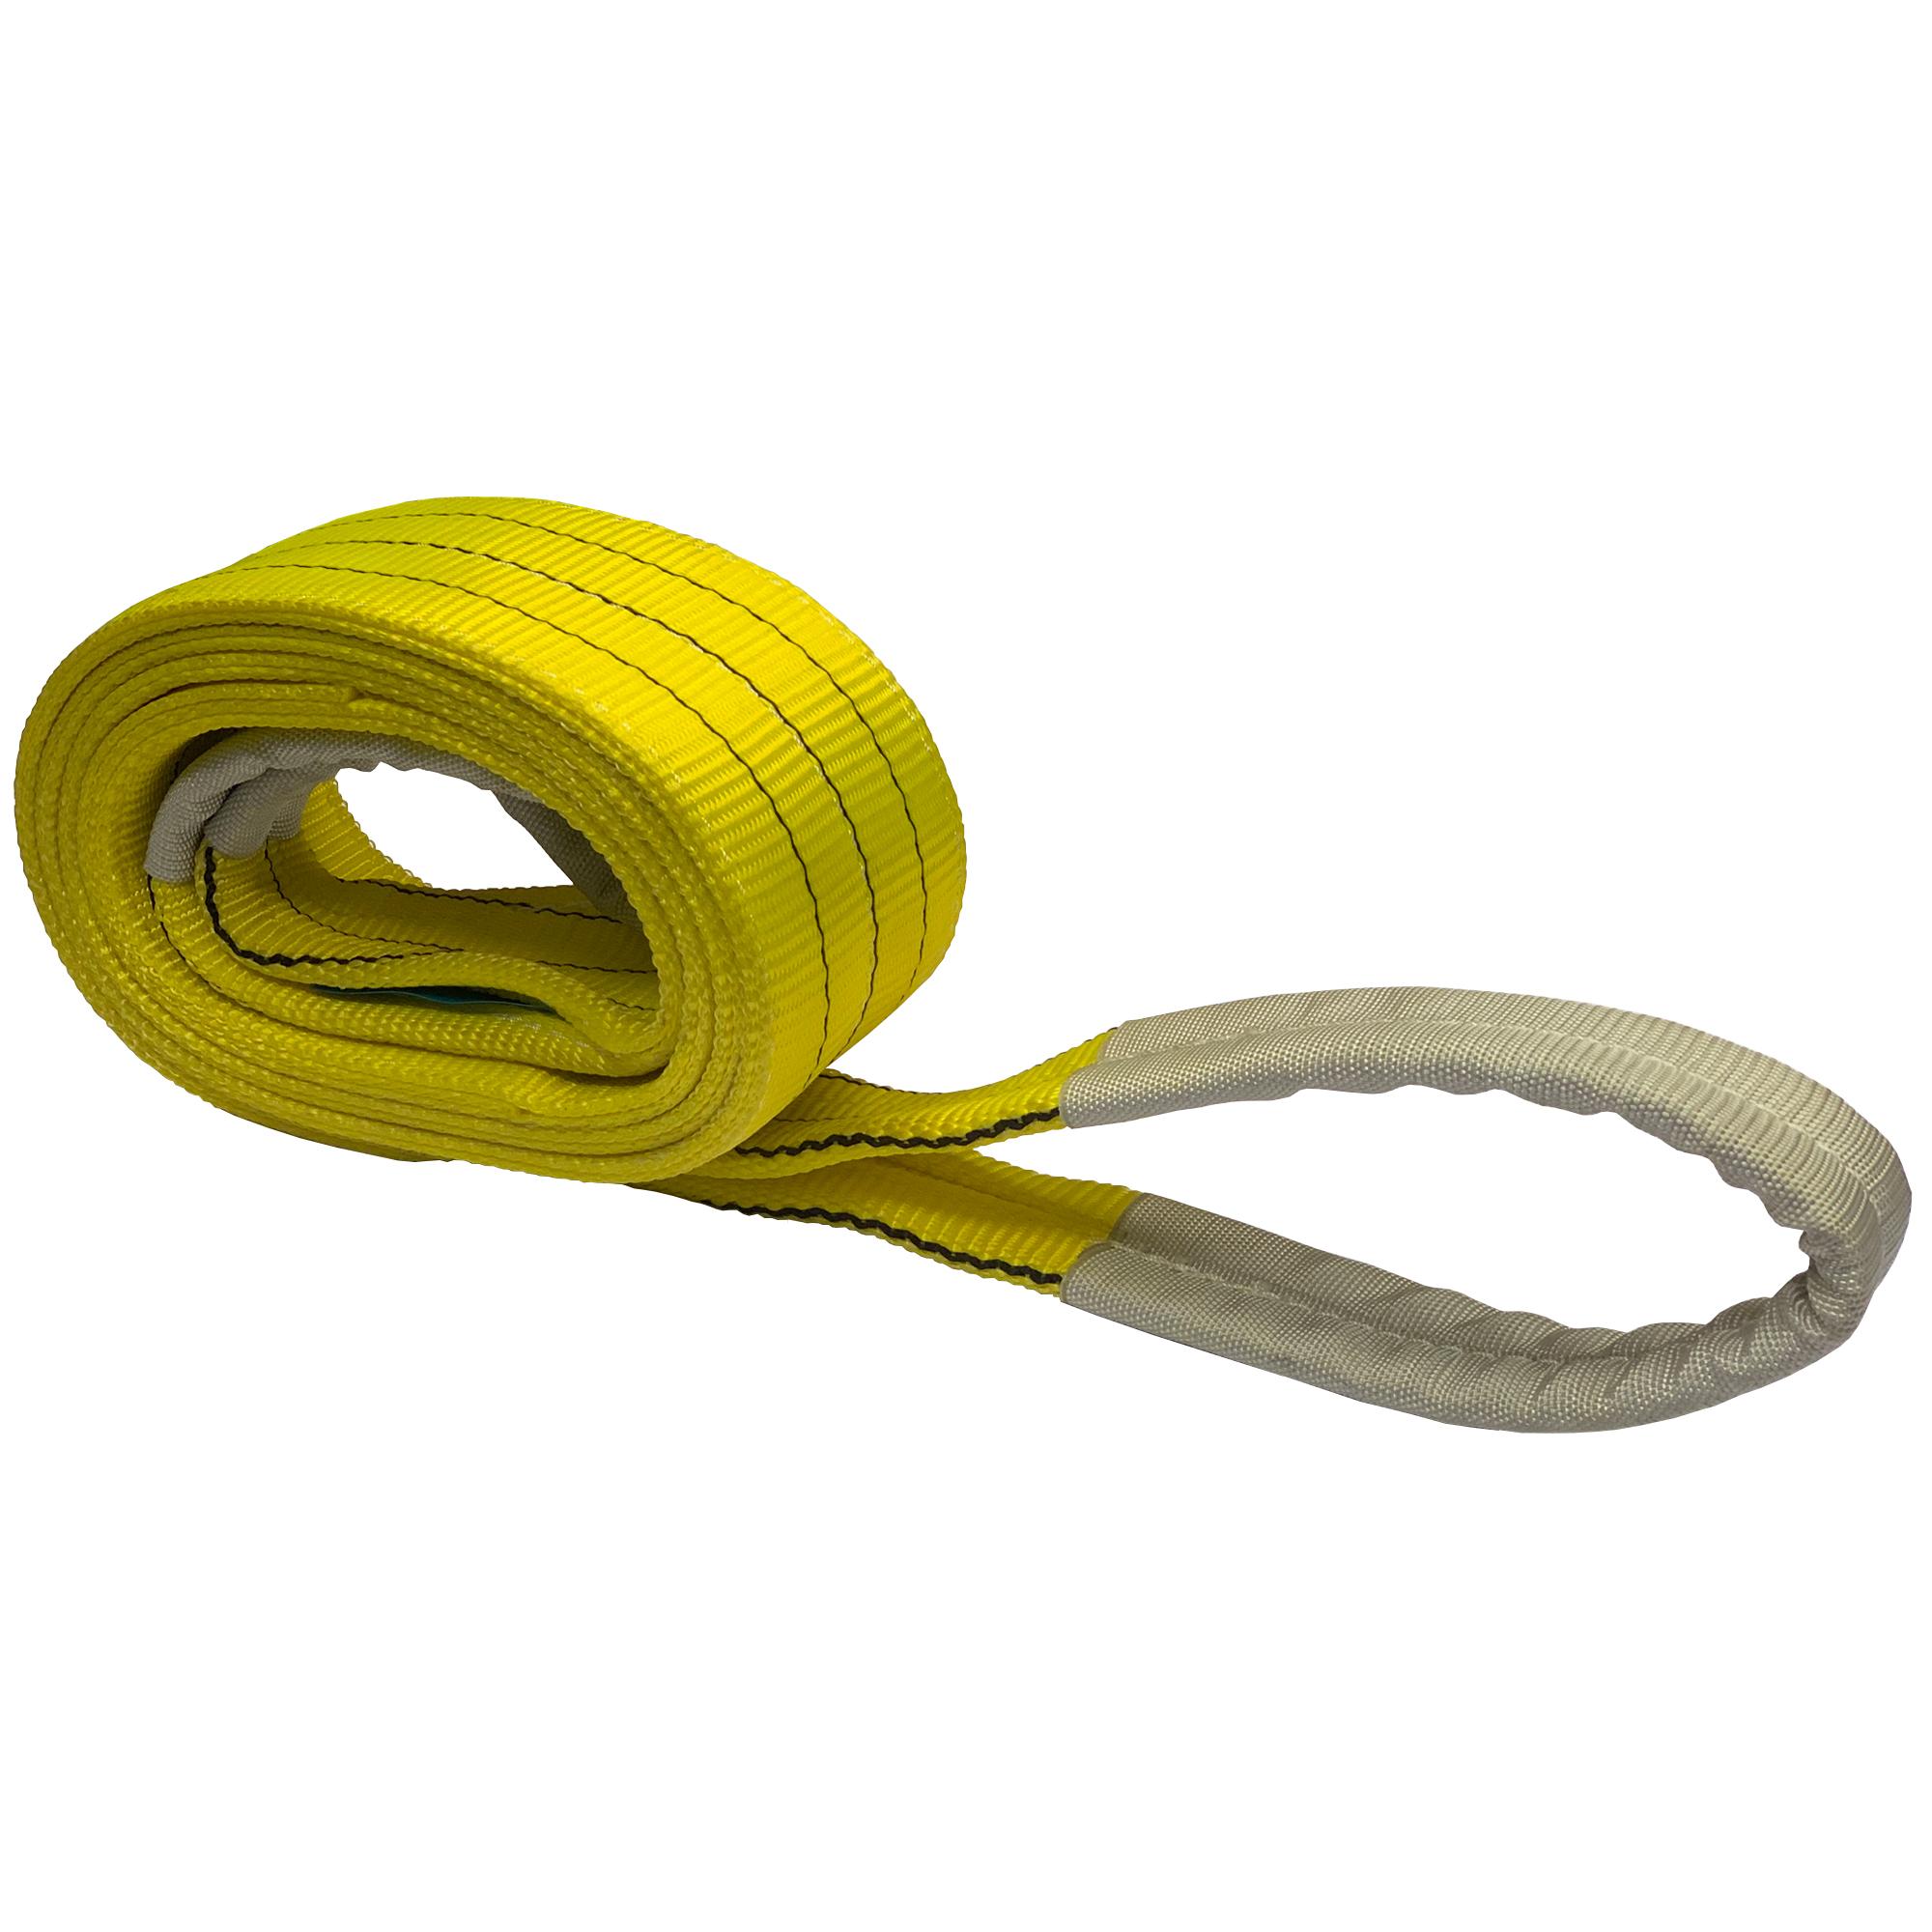 images-WEBBING SLING SPECIFICATIONS-FLAT WEBBING SLINGS-UK WEBBING SLINGS-HEAVY DUTY WEBBING SLINGS-DUPLEX WEBBING SLINGS-FLAT SIMPLEX WEBBING SLINGS-BOAT LIFTING SLINGS-SAFETY LIFTING SALINGS-POLYESTER WEBBING SLINGS-cyprus